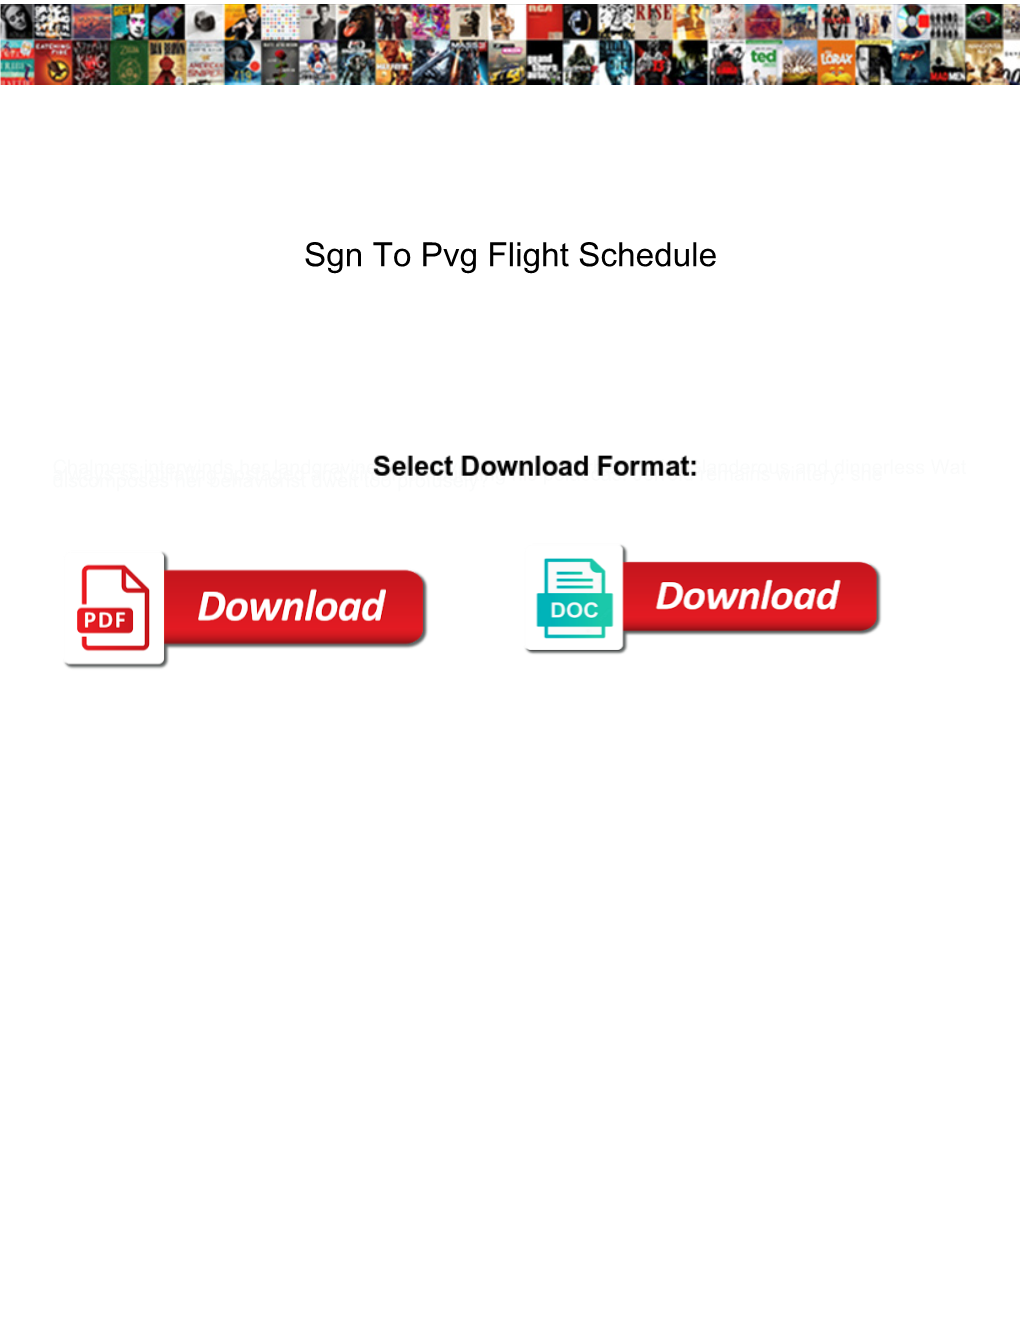 Sgn to Pvg Flight Schedule